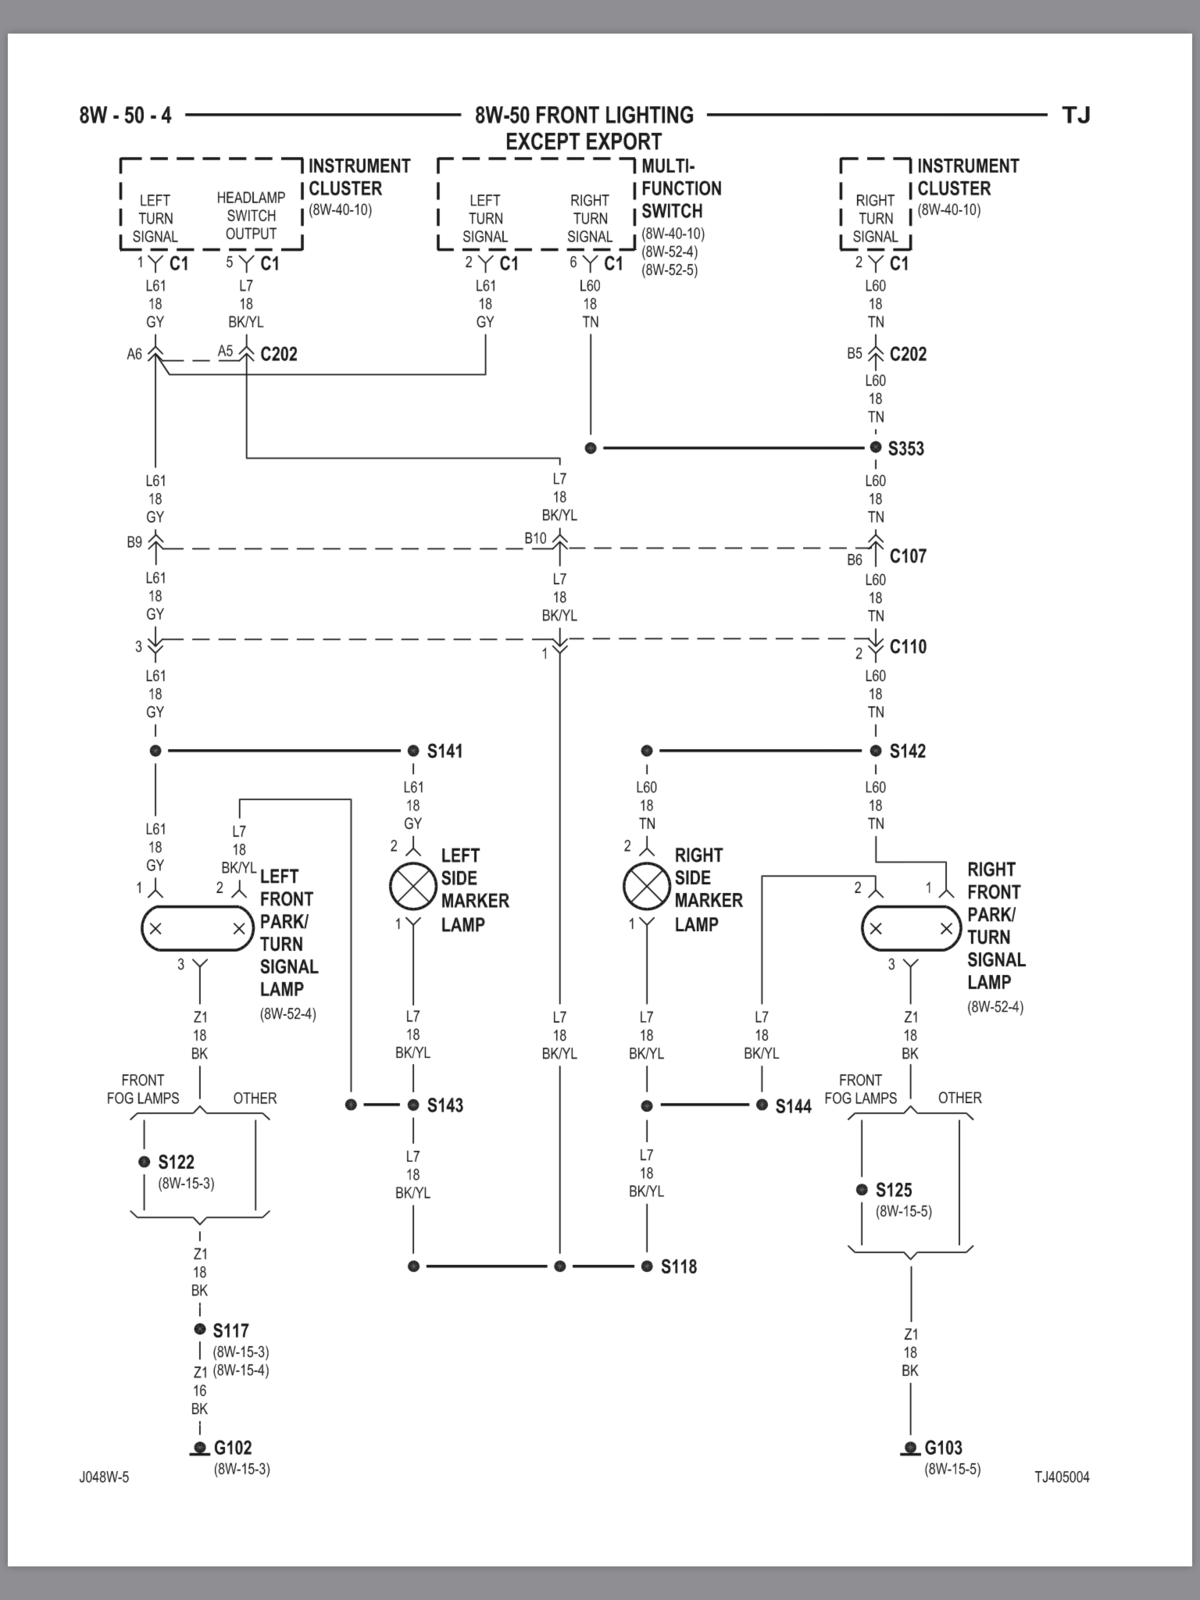 Wiring Guide or Diagram | Jeep Wrangler TJ Forum  2009 Jeep Wrangler Wiring Diagram    Jeep Wrangler TJ Forum